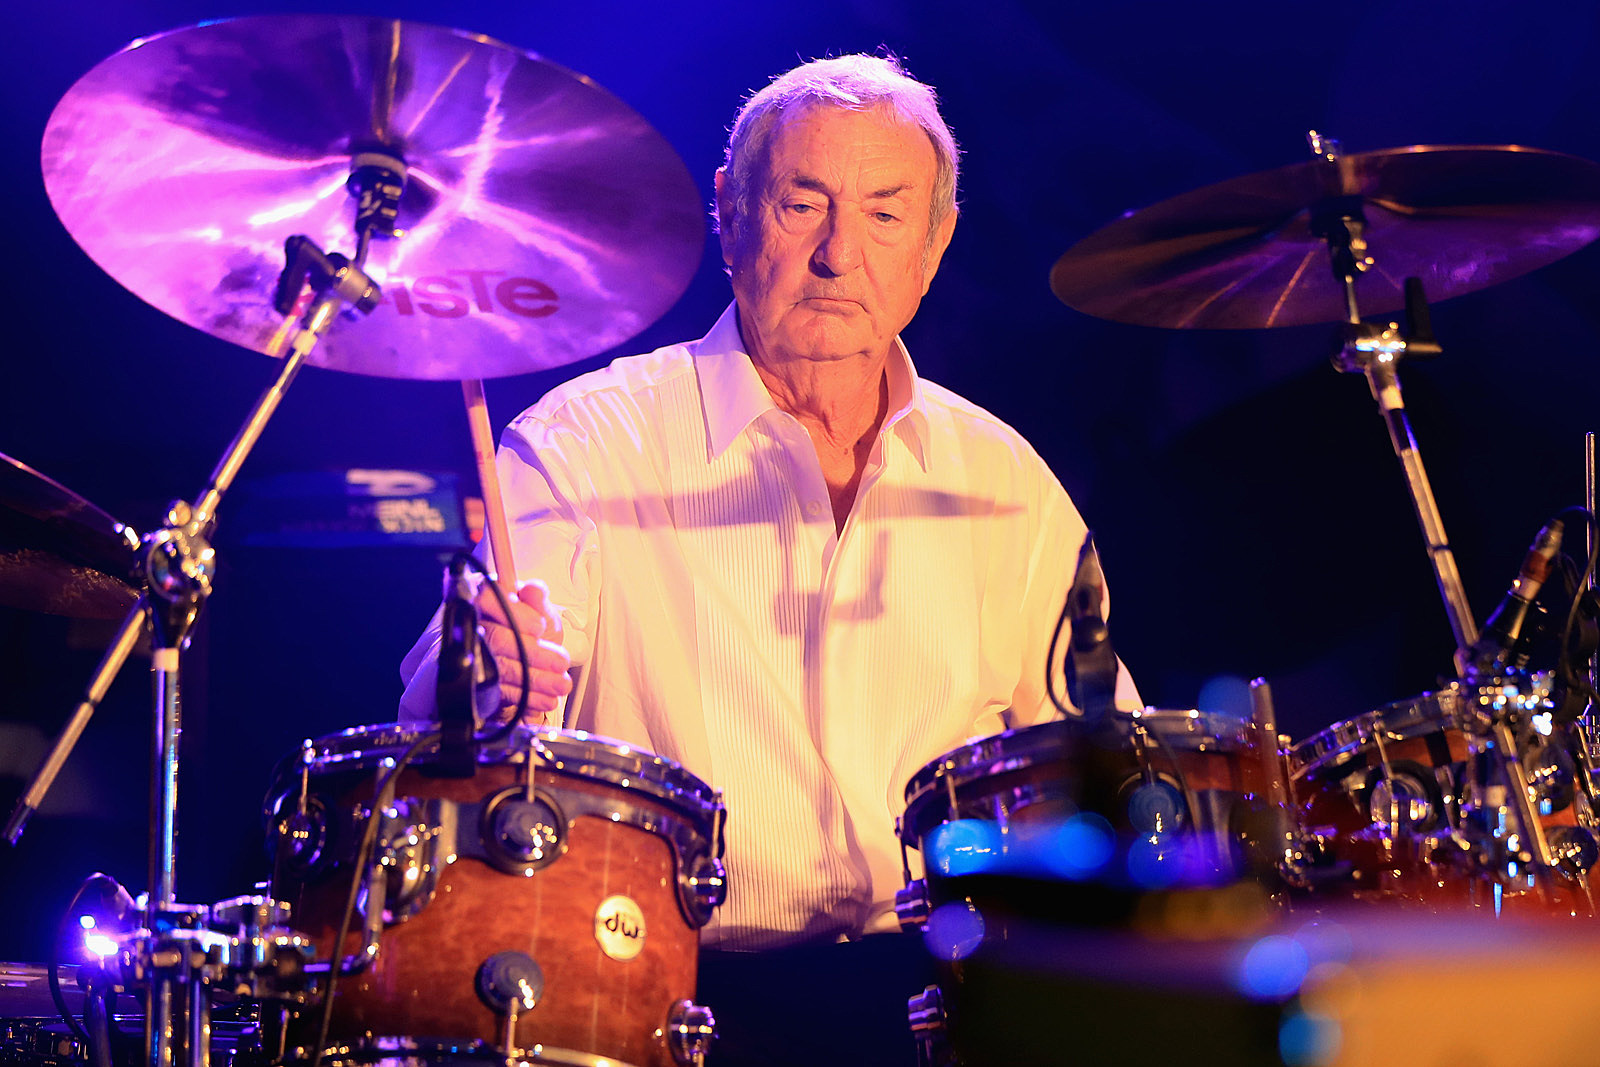 Please join me here at in wishing the one and only Nick Mason a very Happy 77th Birthday today  